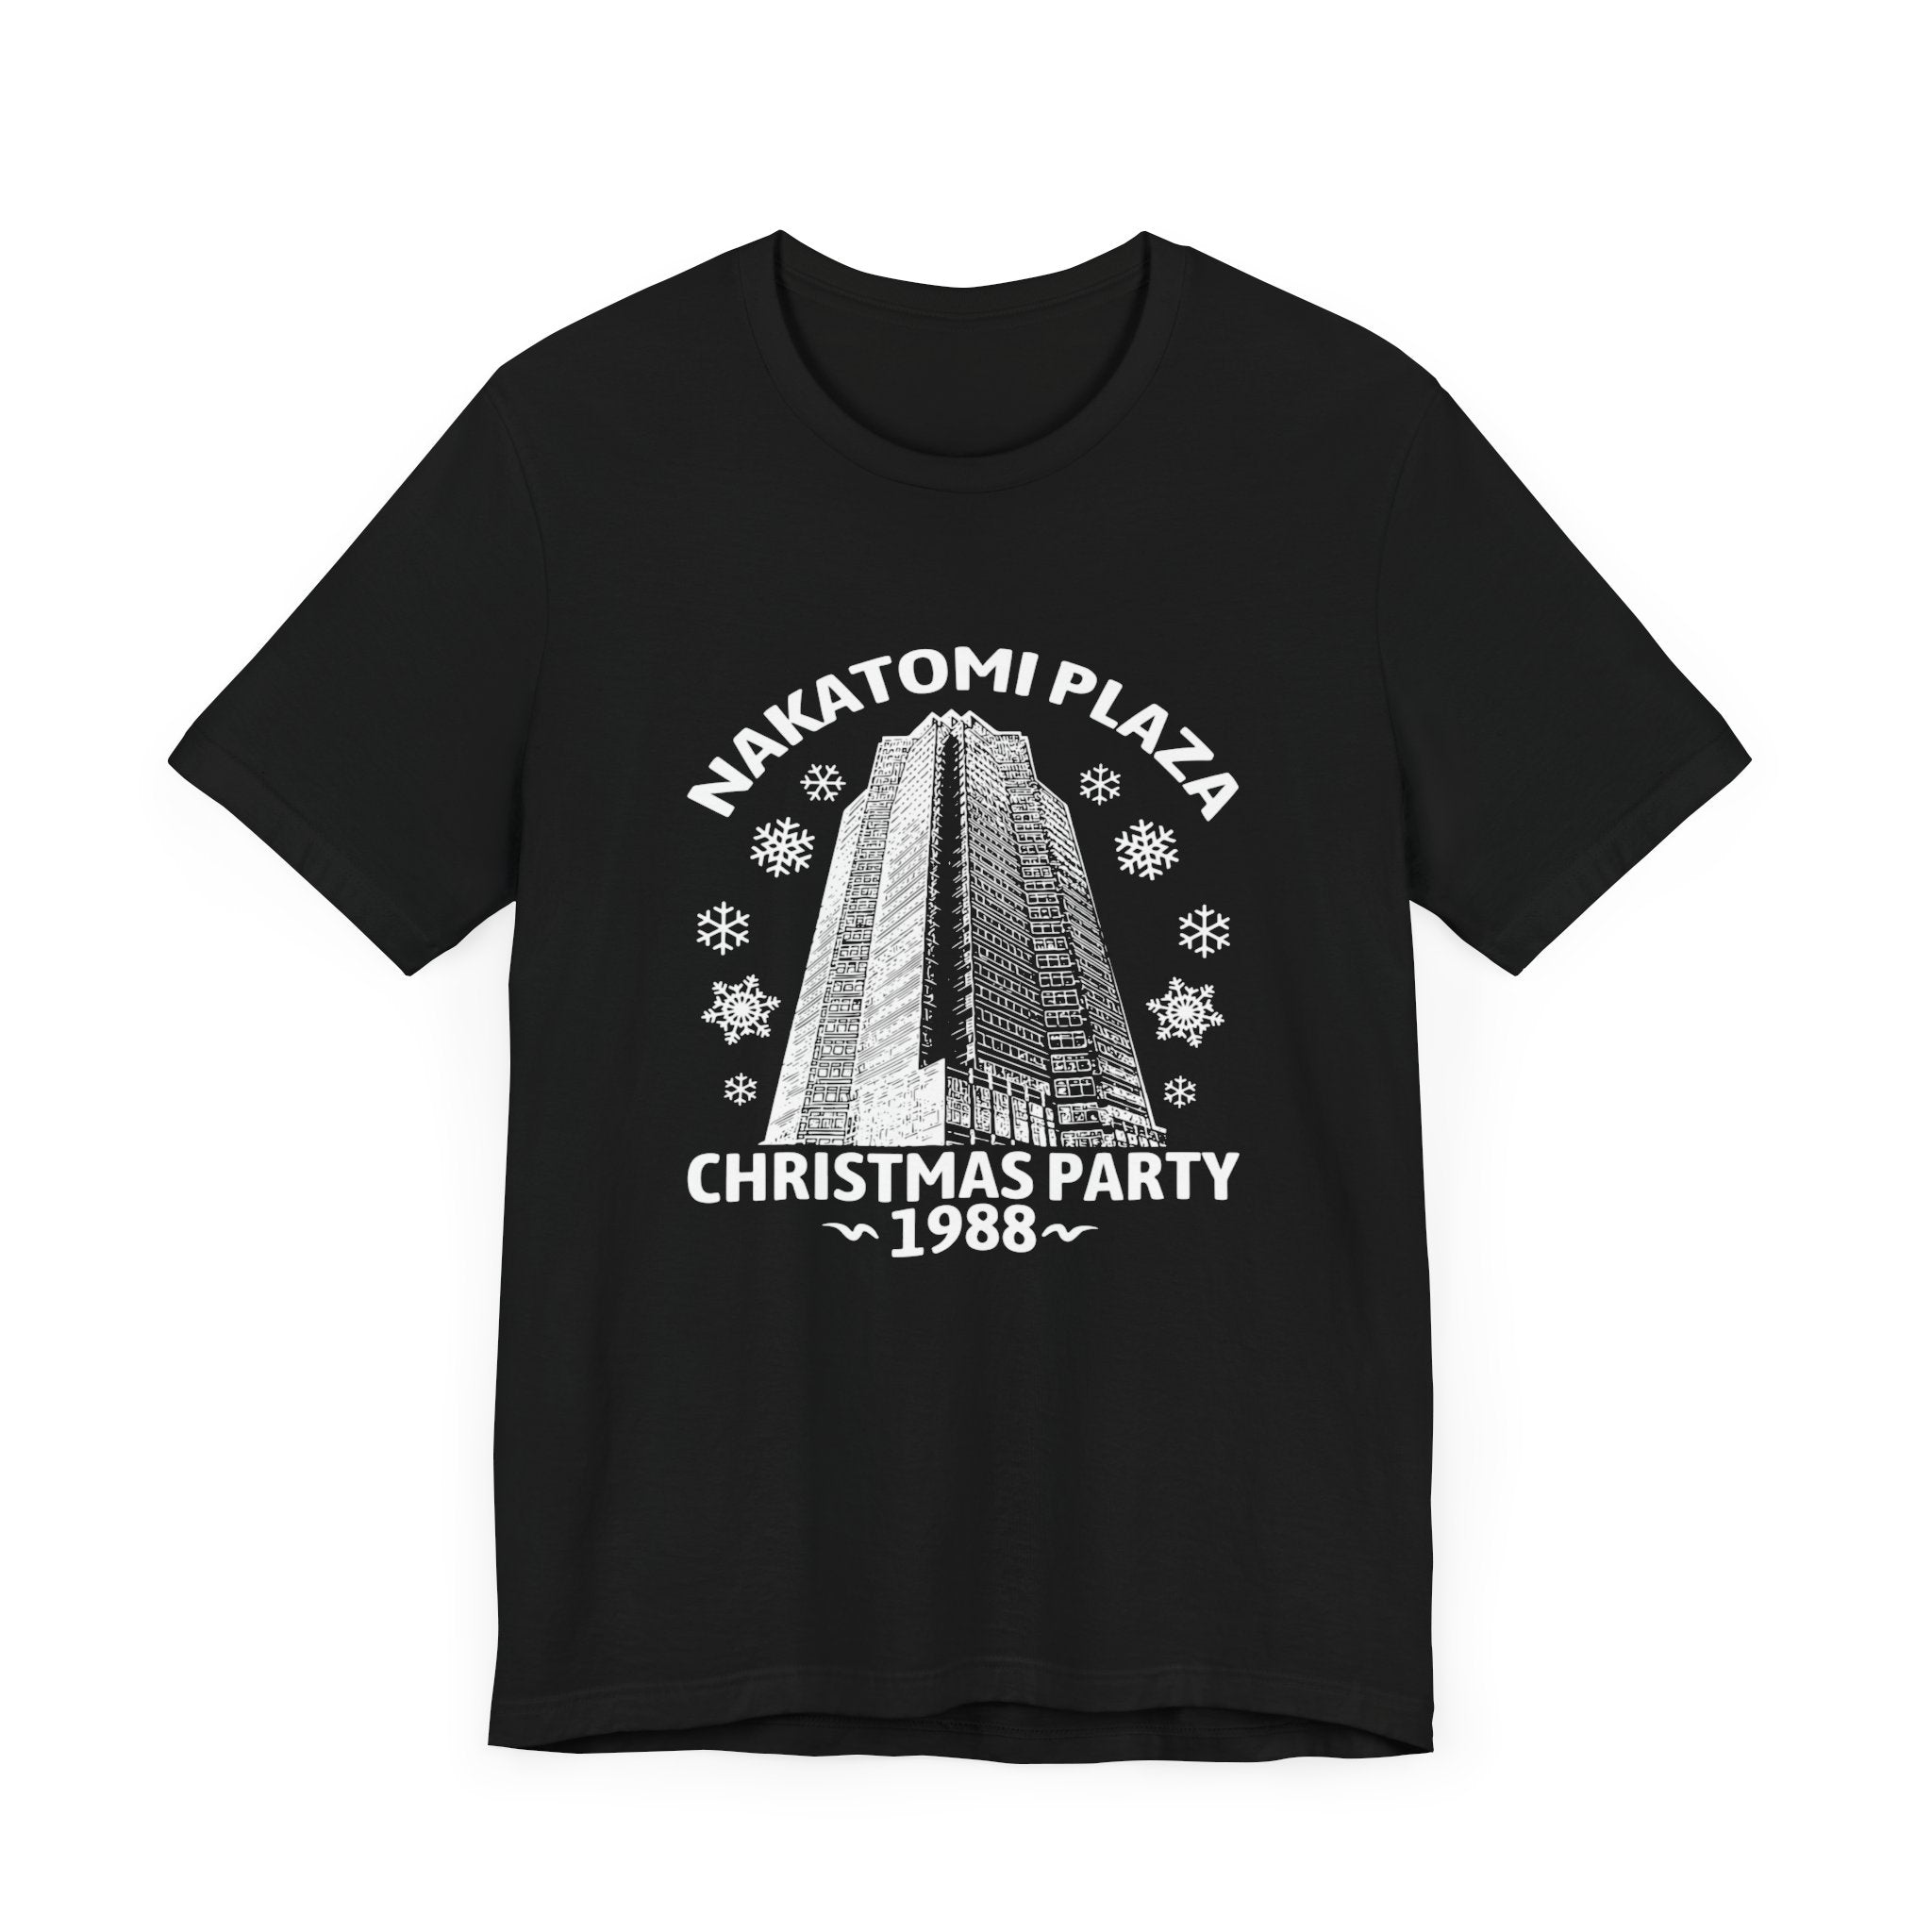 Unisex jersey tee with a graphic of Nakatomi Plaza and the text "Nakatomi Plaza Christmas Party 1988" surrounded by snowflakes.